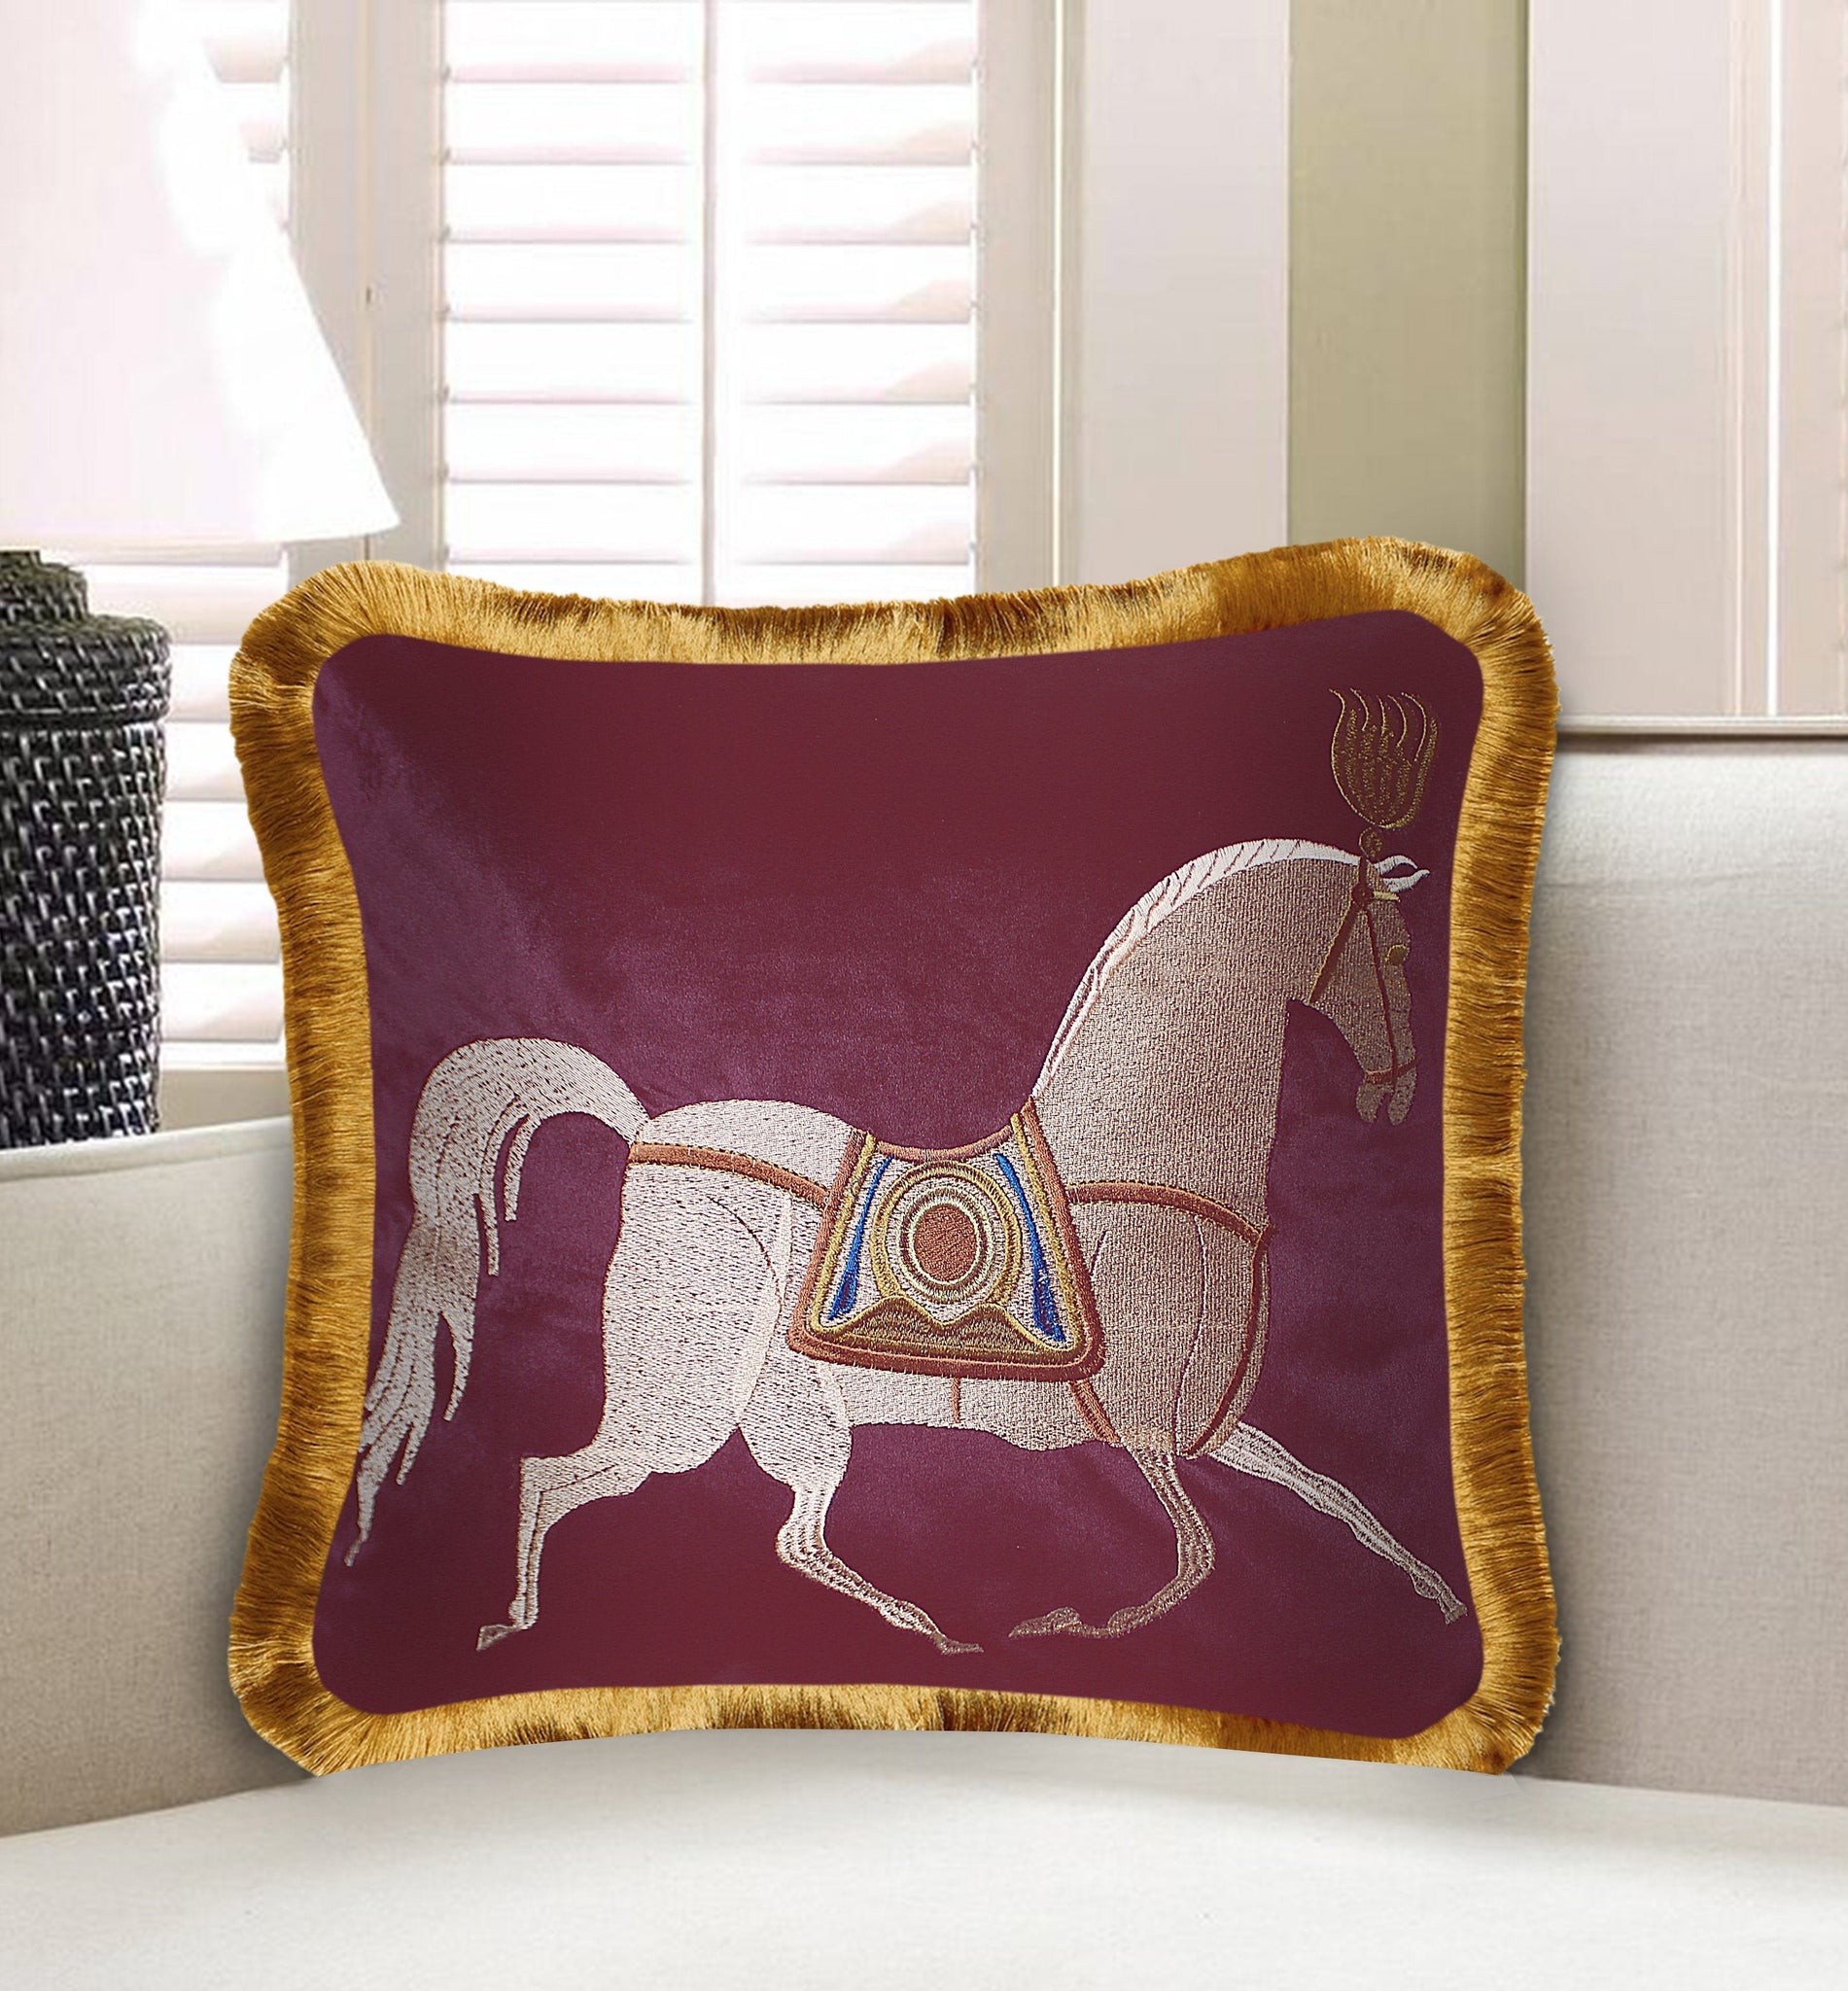 Red Luxury Classic Horse Embroidery Baroque Style Decorative Cushion Cover Pillow Case Home European Sofa Throw Pillow